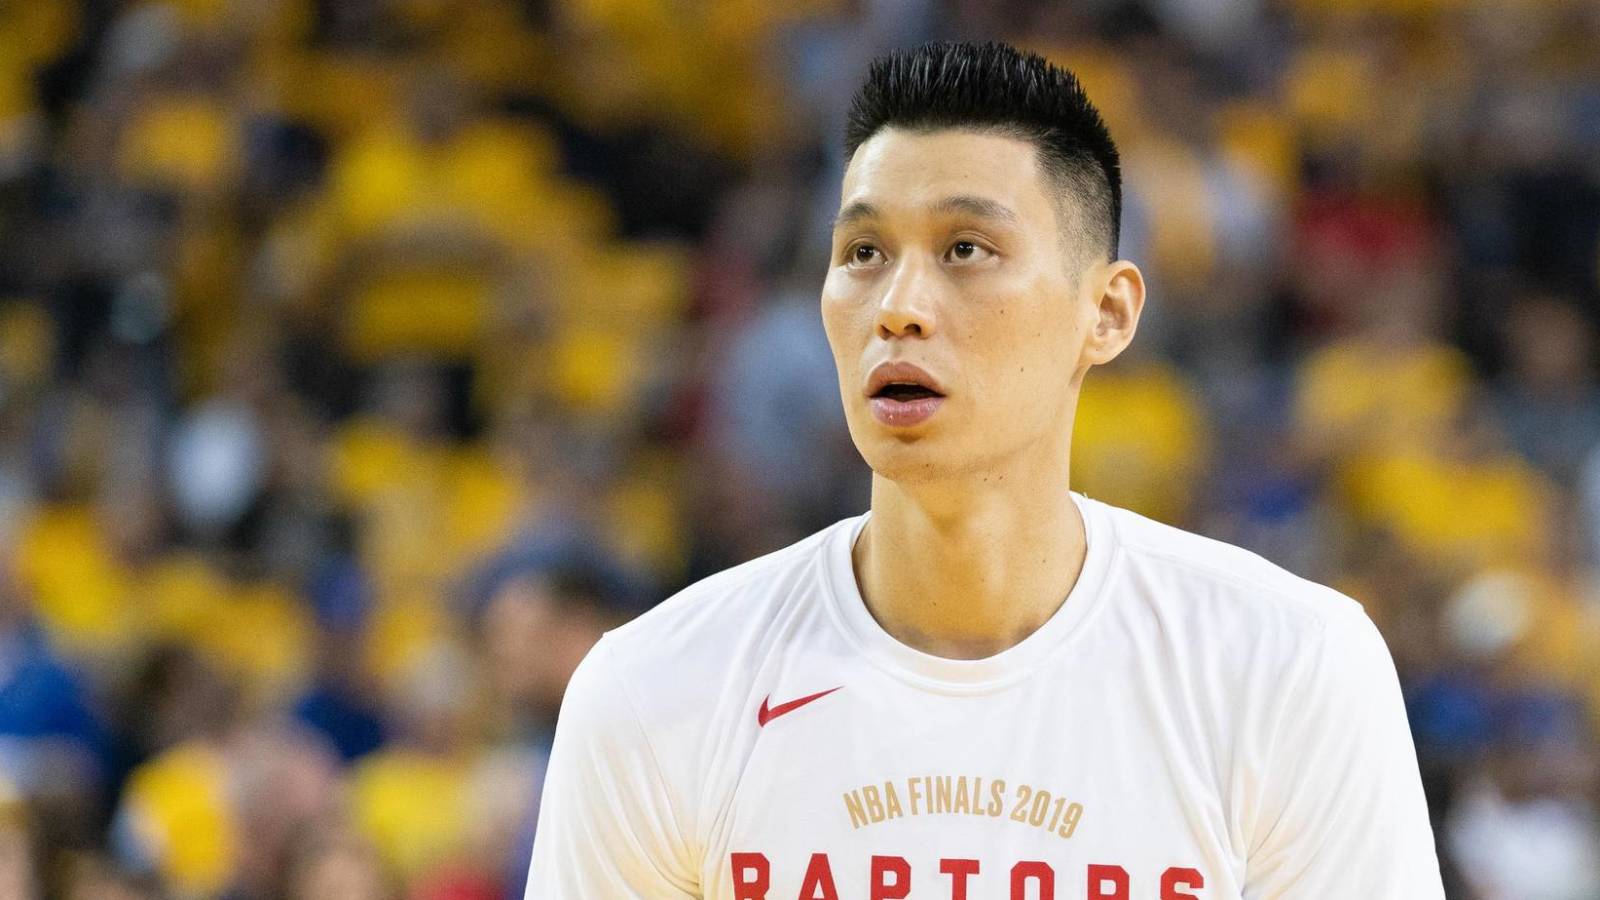 Report: Jeremy Lin finalizing deal with Warriors